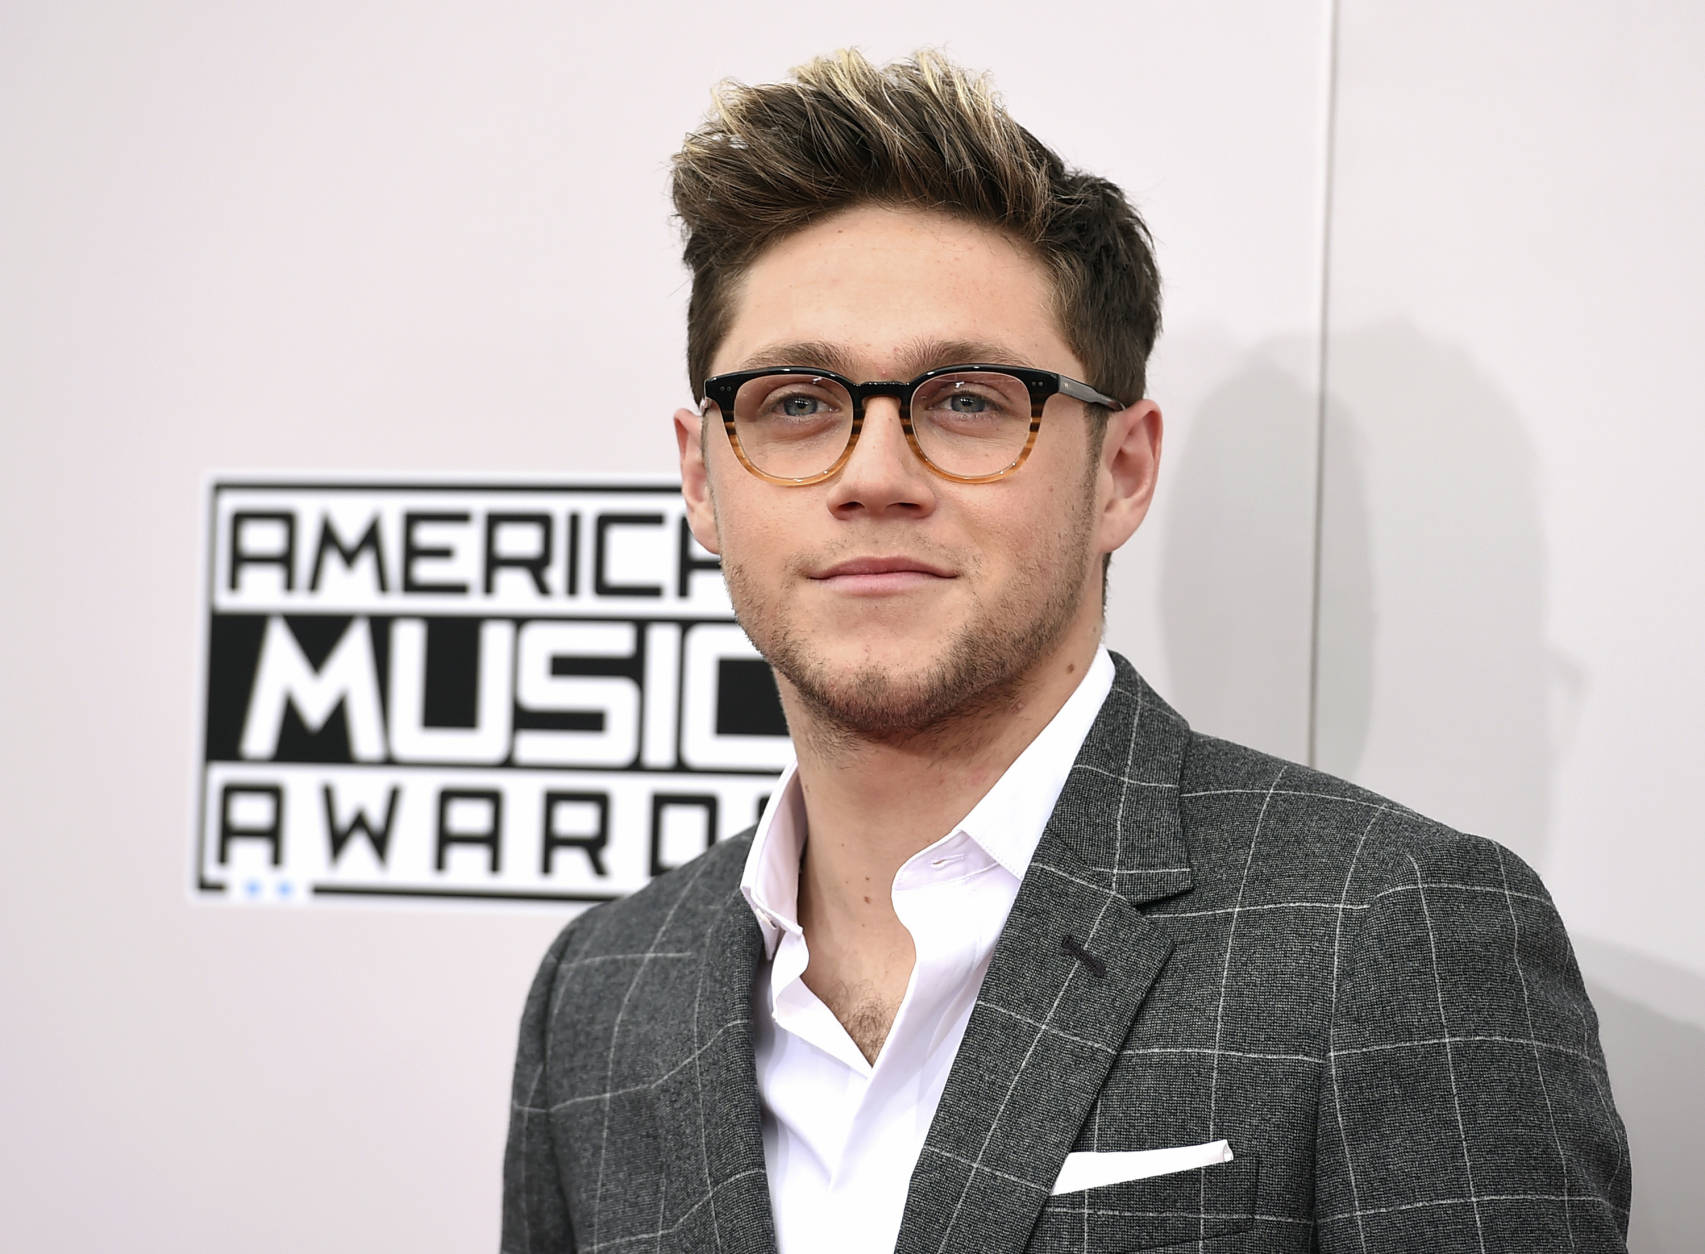 Niall Horan arrives at the American Music Awards at the Microsoft Theater on Sunday, Nov. 20, 2016, in Los Angeles. (Photo by Jordan Strauss/Invision/AP)